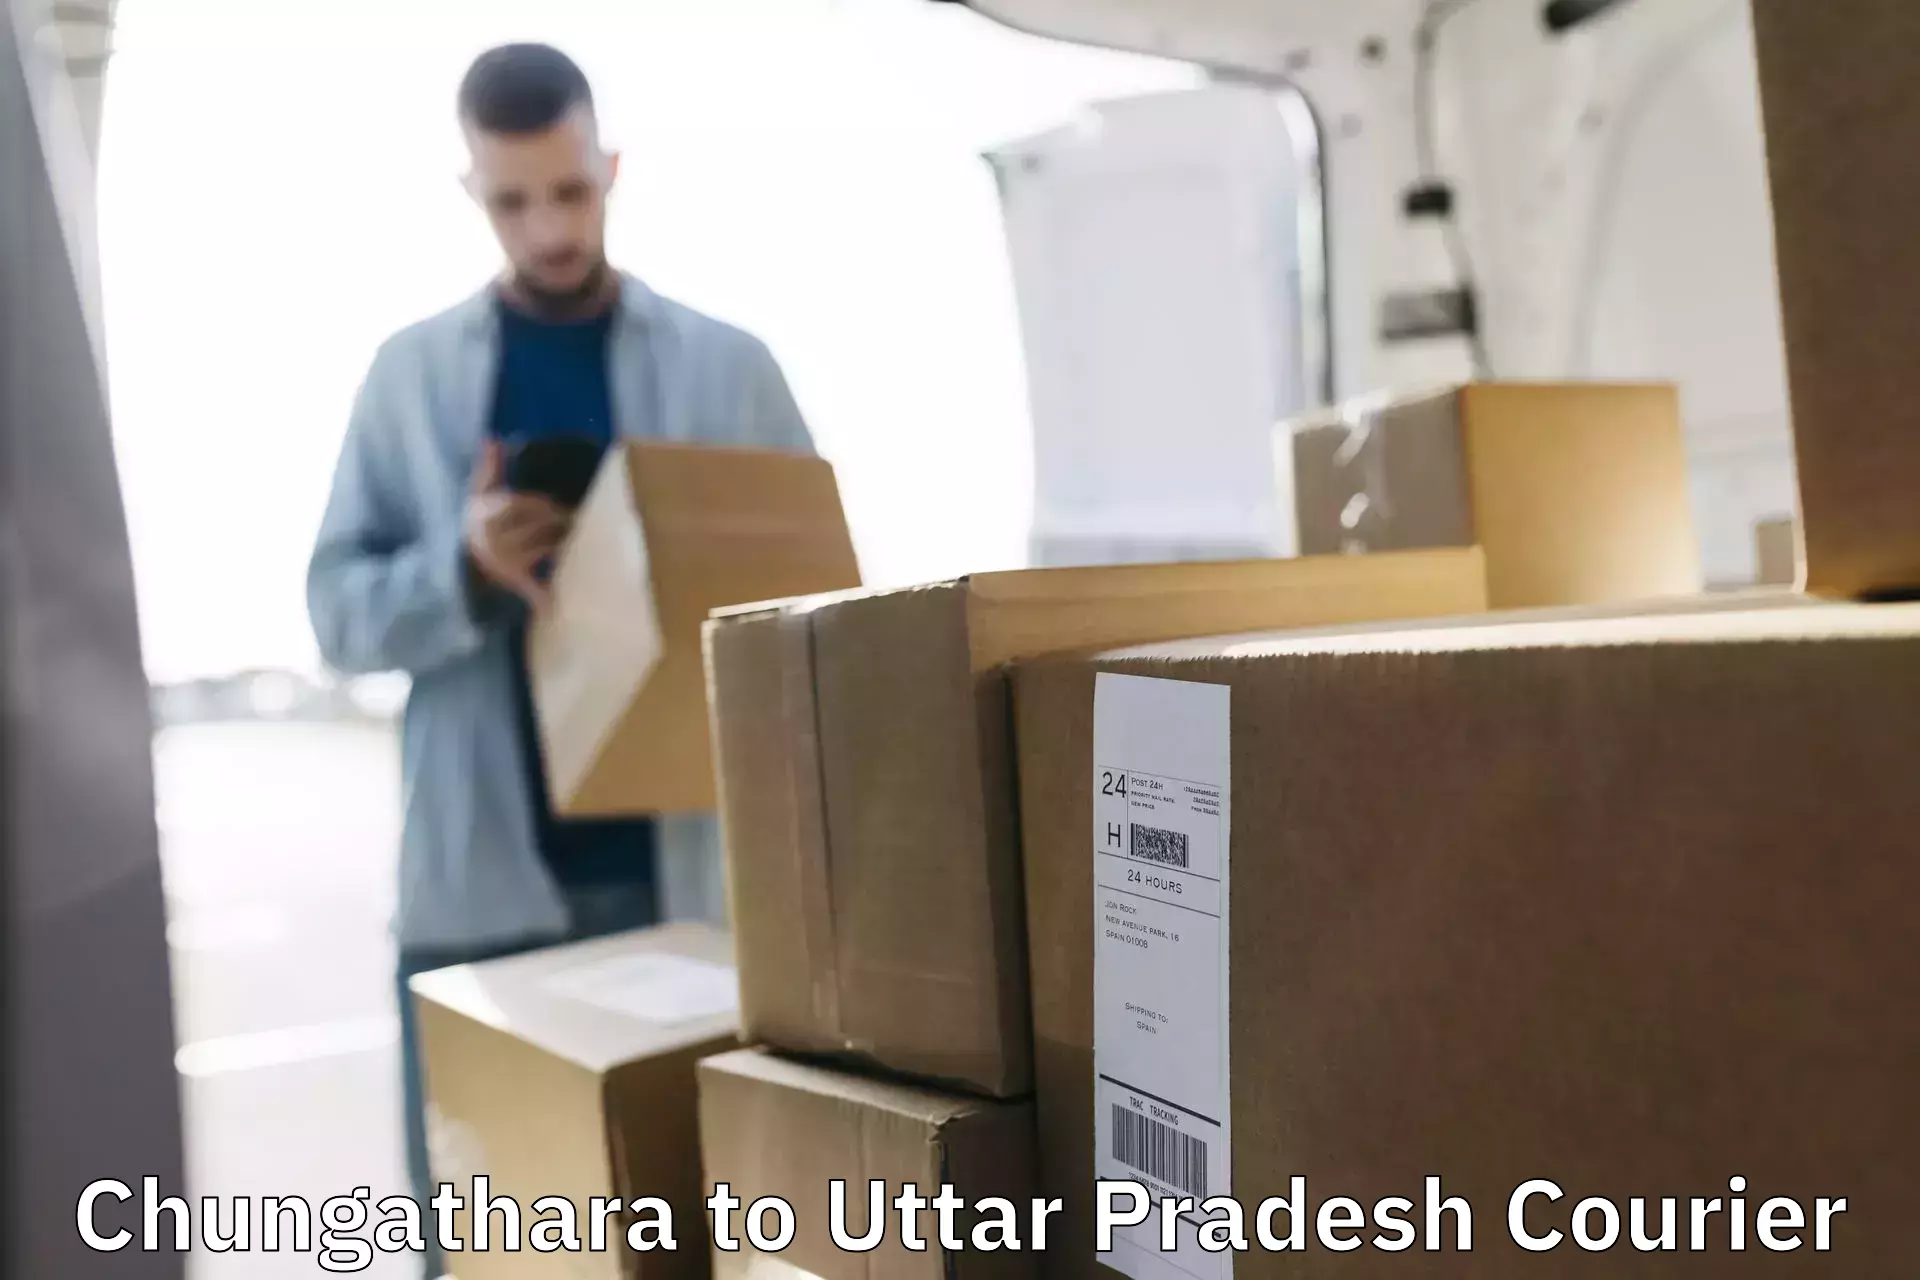 Personal parcel delivery Chungathara to Utraula